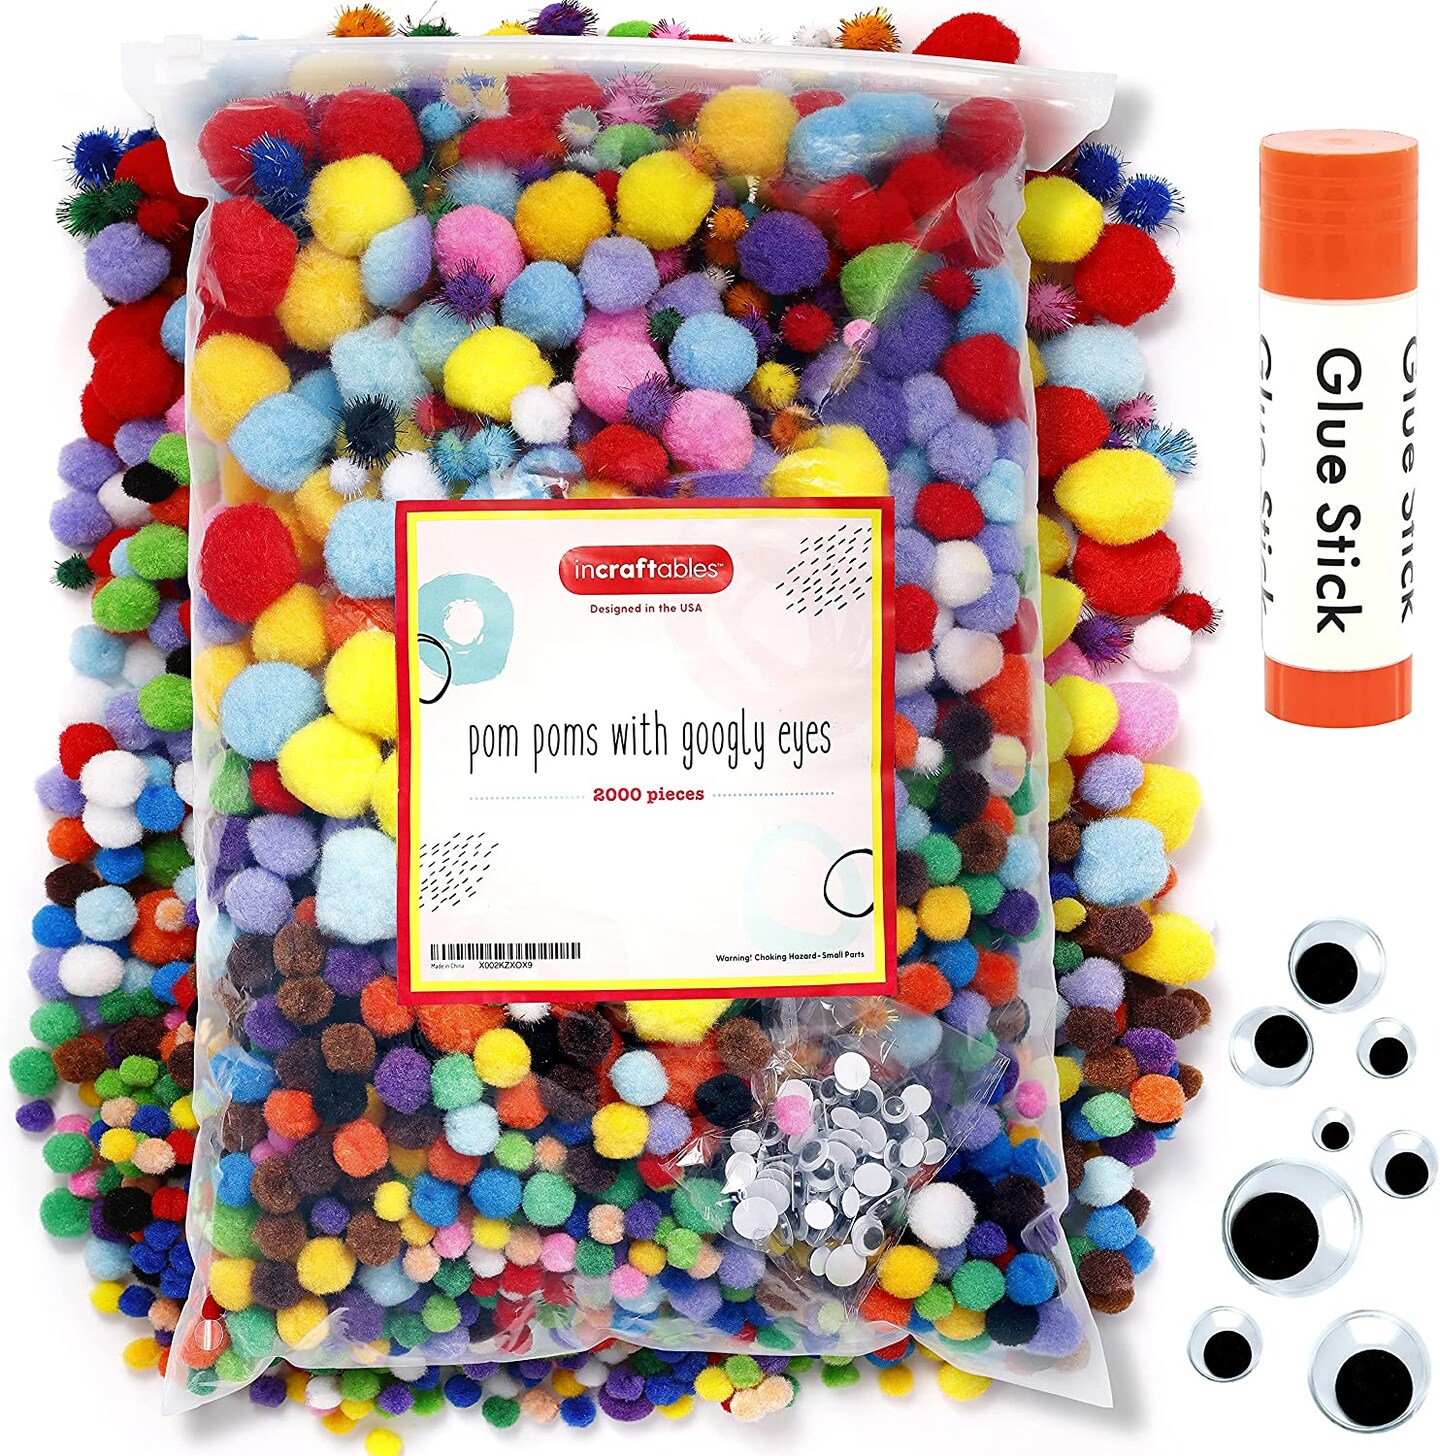 Essentials by Leisure Arts Pom Poms - Red - 7mm - 100 piece pom poms arts  and crafts - red pompoms for crafts - craft pom poms - puff balls for crafts  